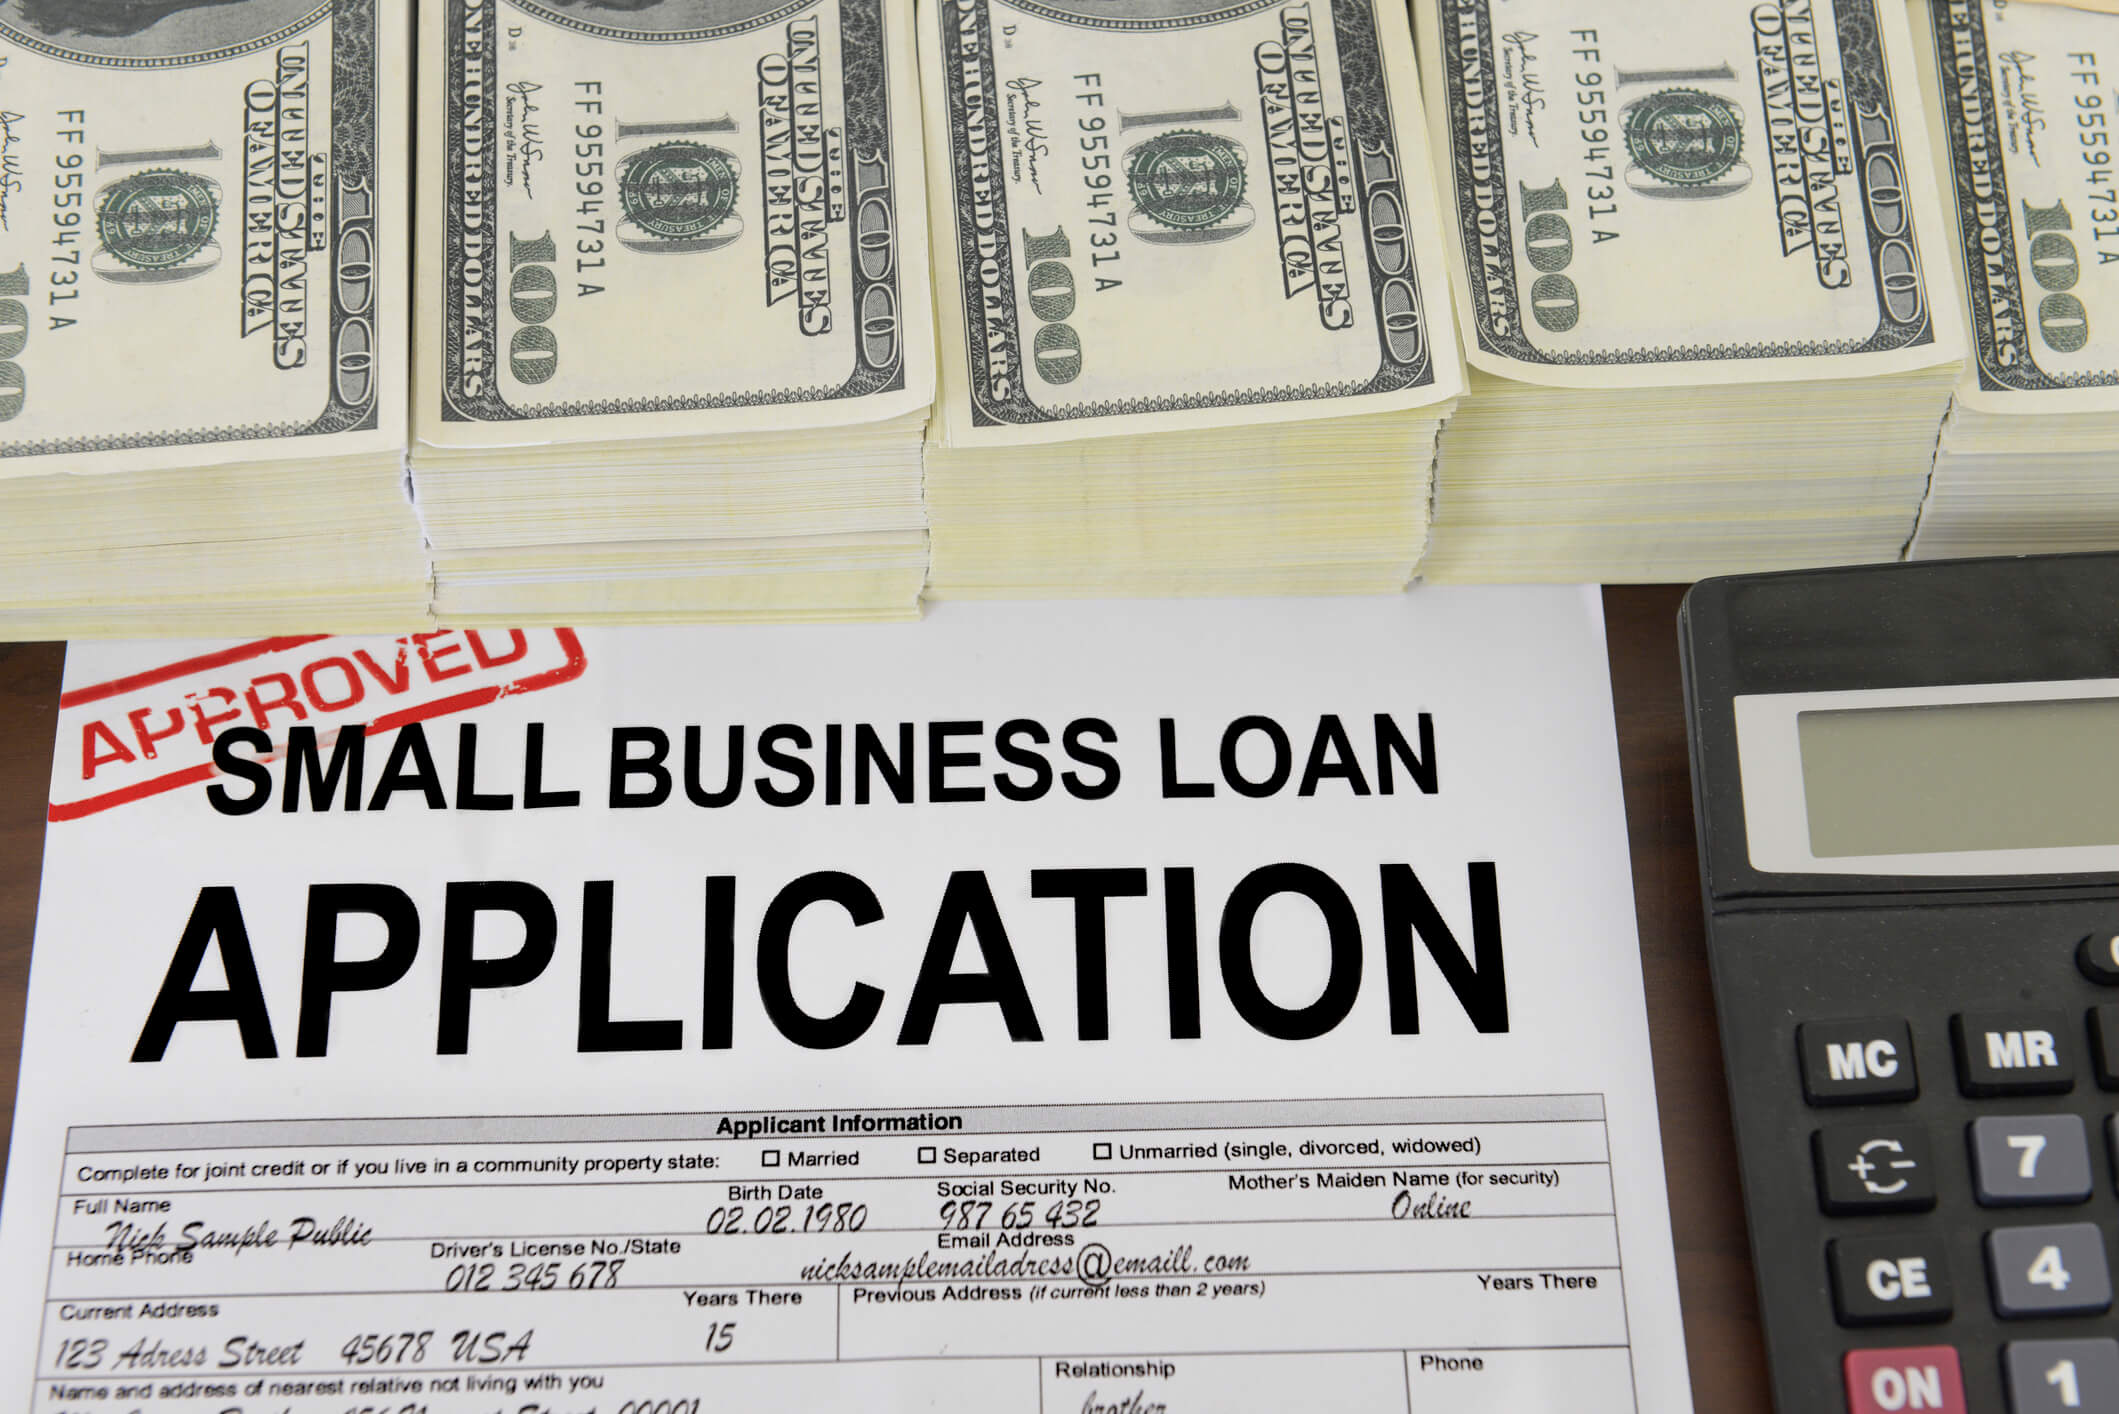 Small Business Loan Application - Complete Controller